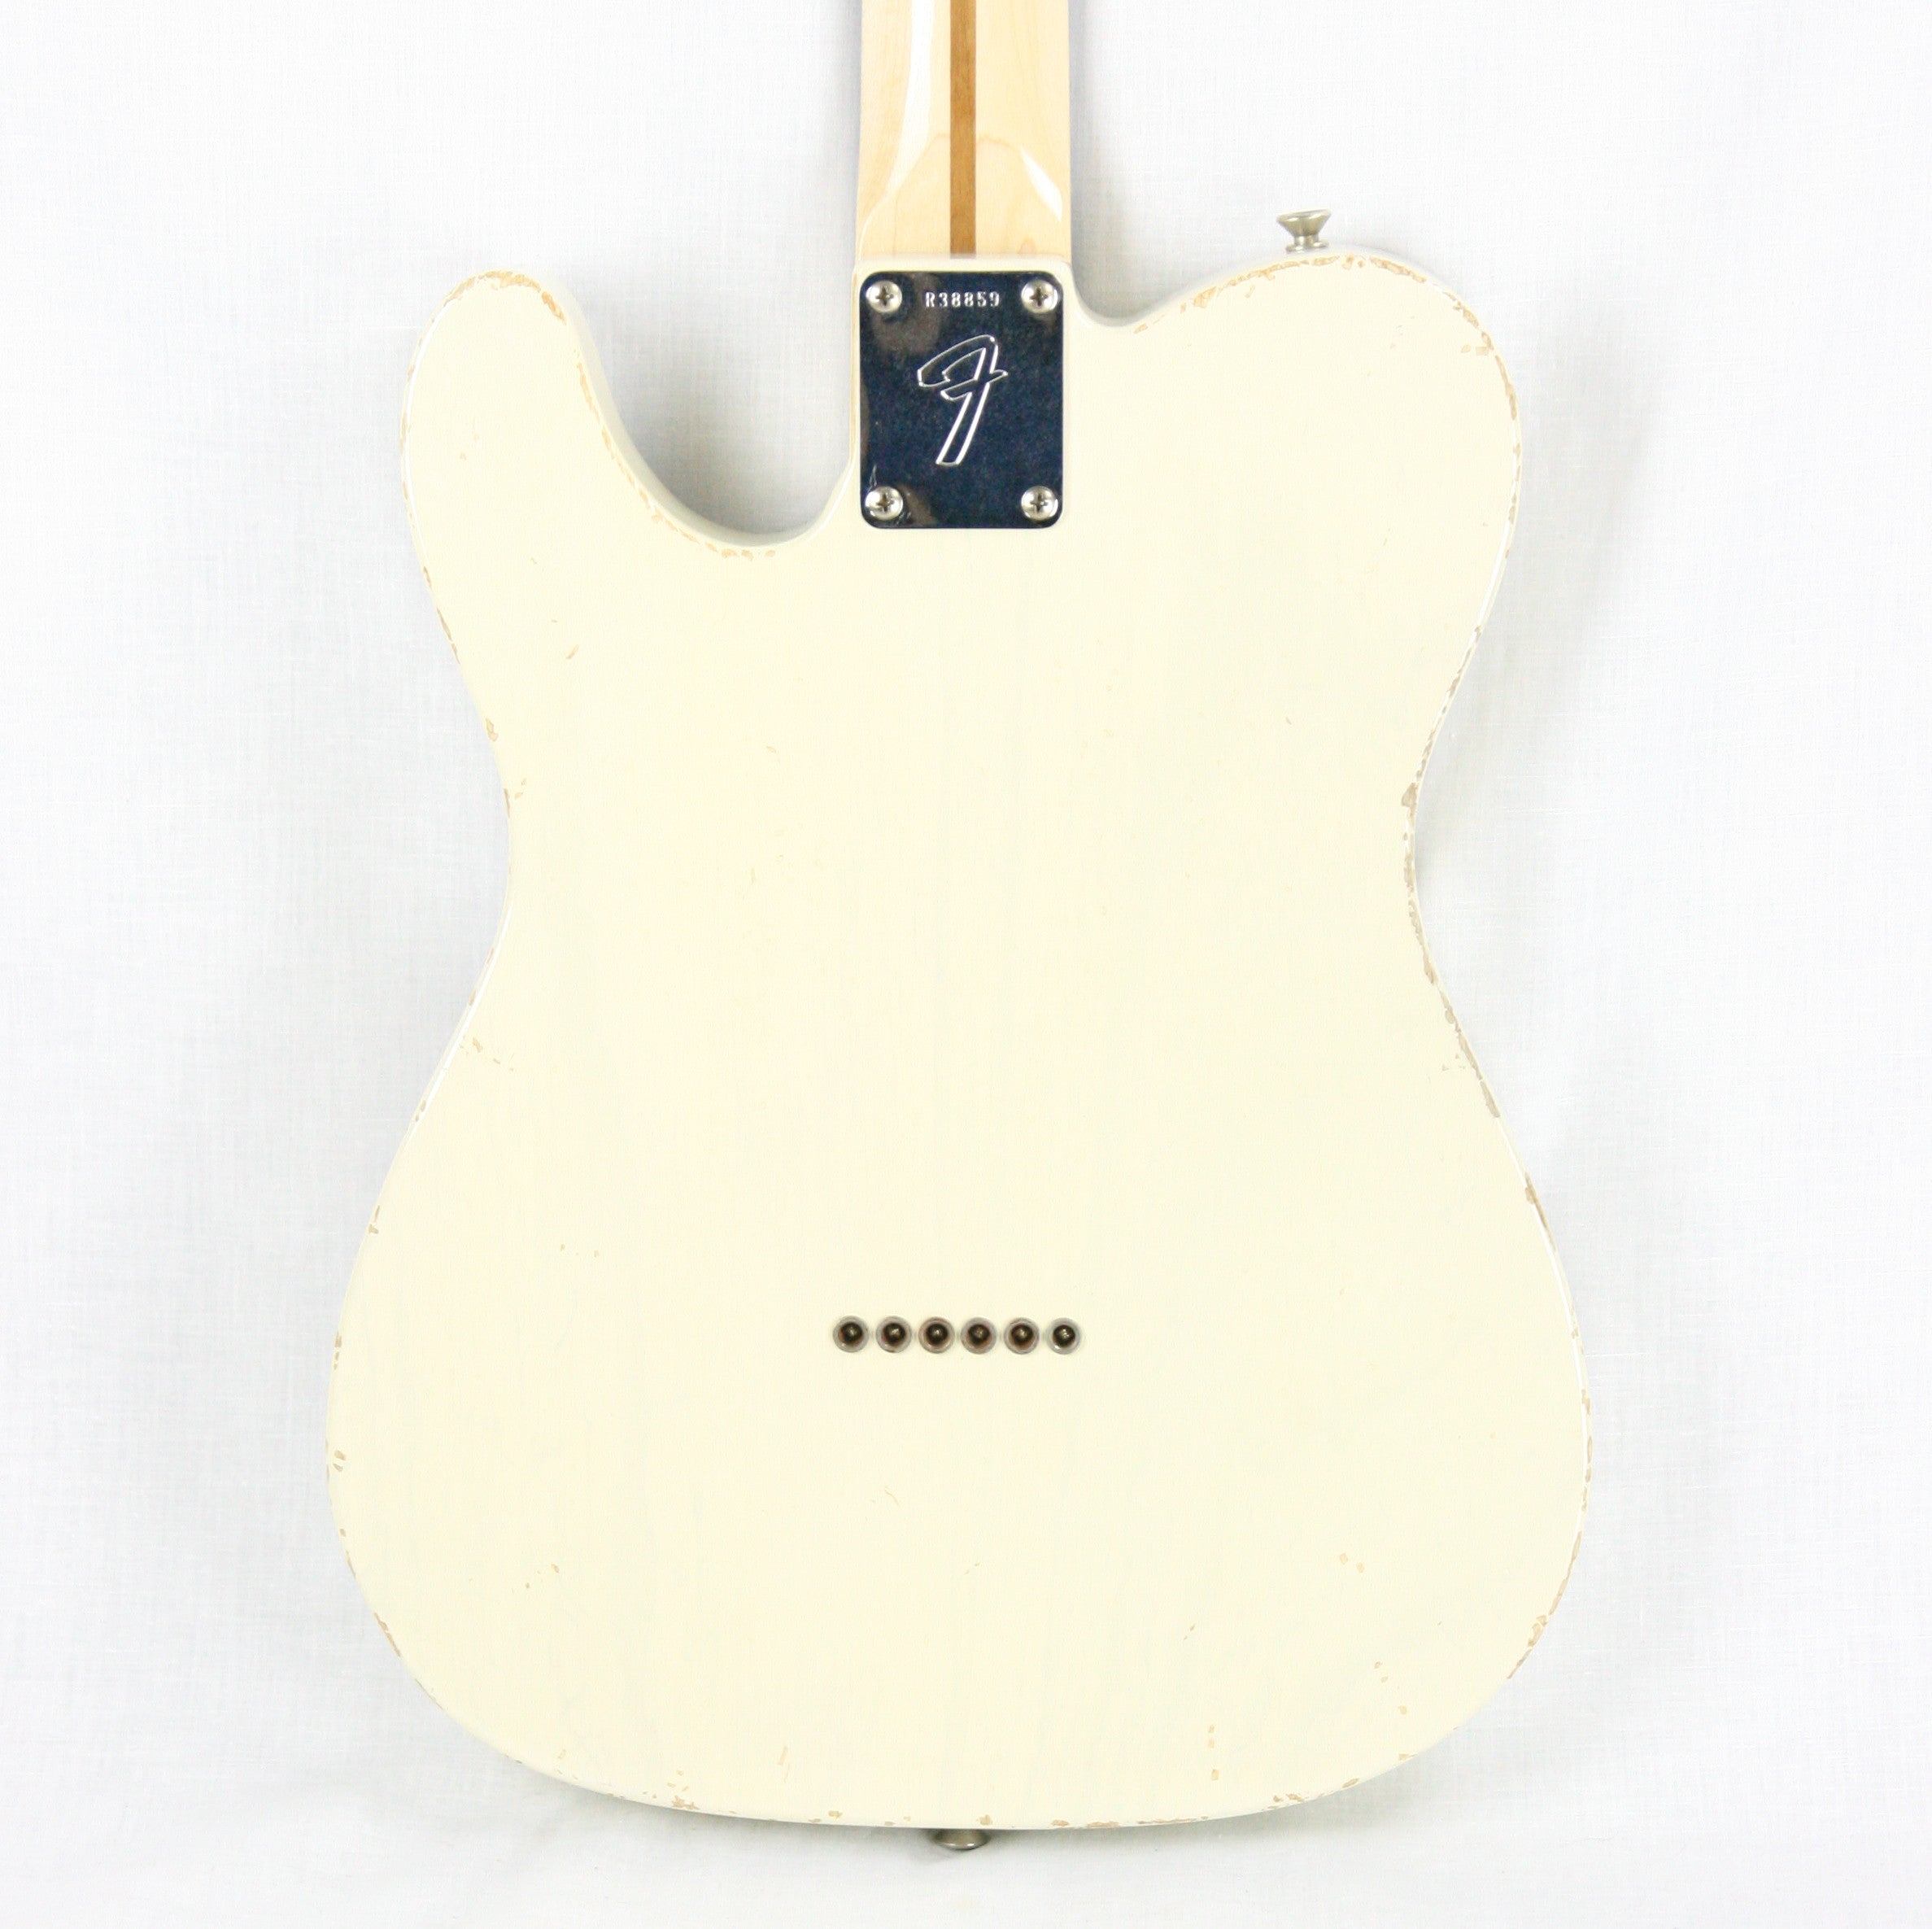 *SOLD*  2008 Fender Masterbuilt 1970 Esquire Relic by Mark Kendrick! Custom Shop Mary Kaye Blonde telecaster